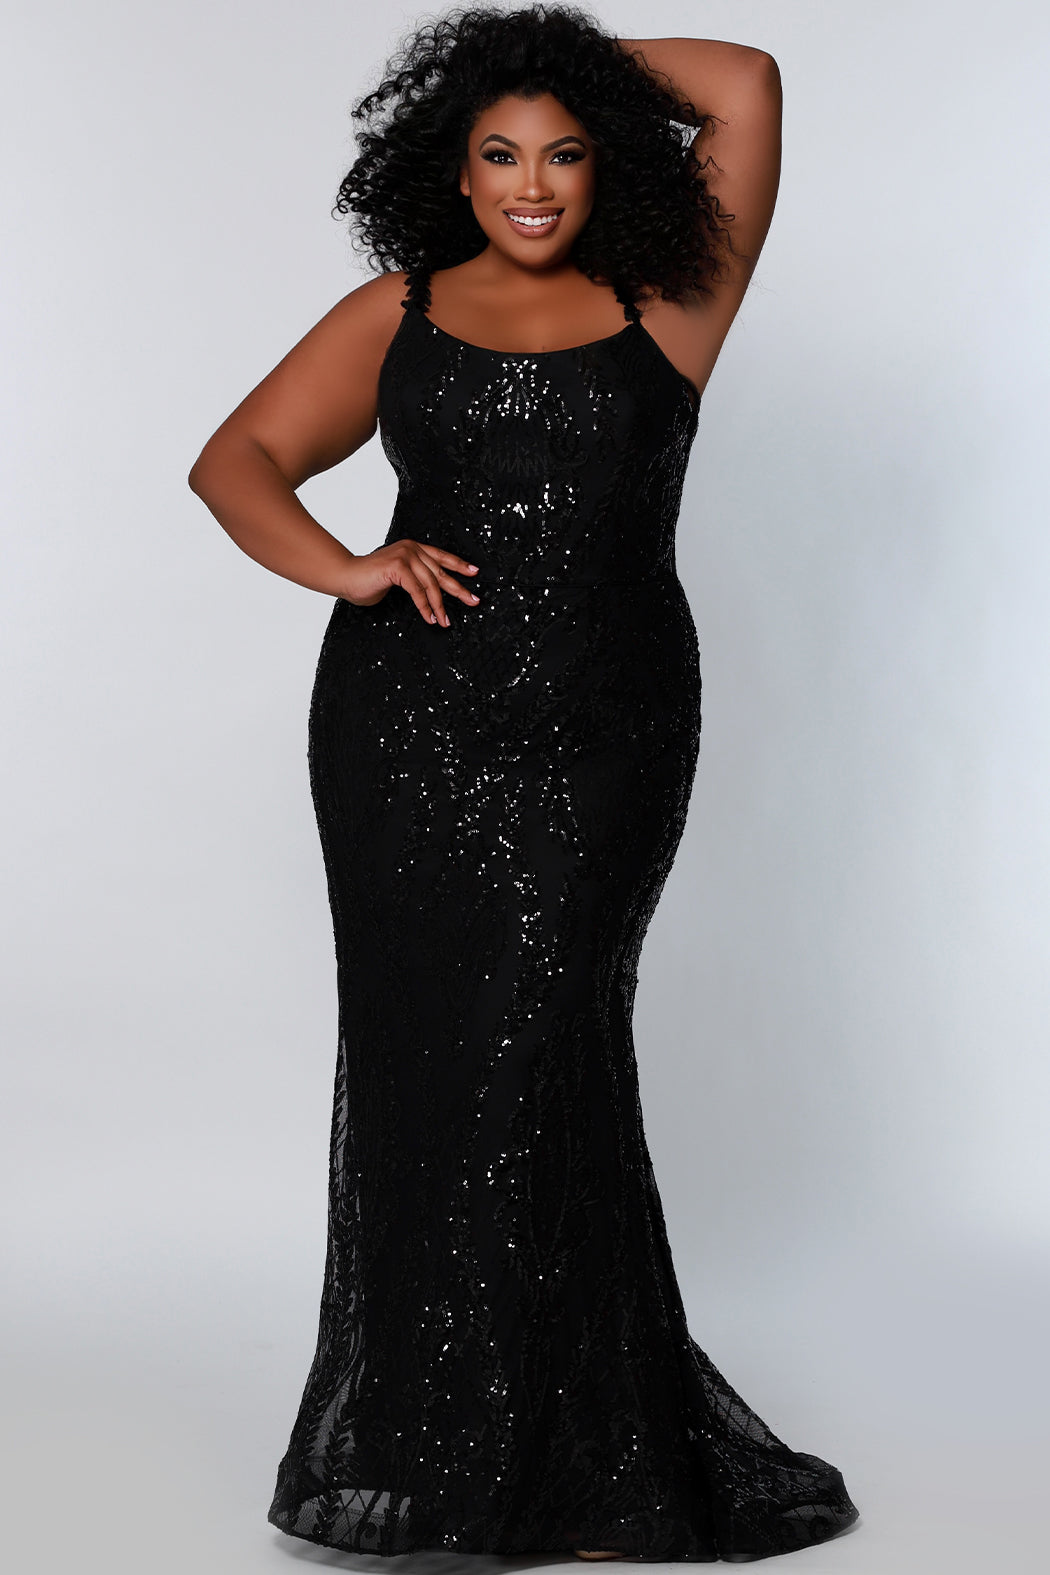 Sydneys Closet SC7332 Long Fitted Sequin Formal Plus Size Prom Dress Evening Gown SC7332 Color: Black/Black Size Availability: 14-32 Slim A-line silhouette Scoop neckline ½ inch straps covered in lace Scoop back Center back zipper Sequins over stretch knit 5 inch train 2 inch horsehair hem